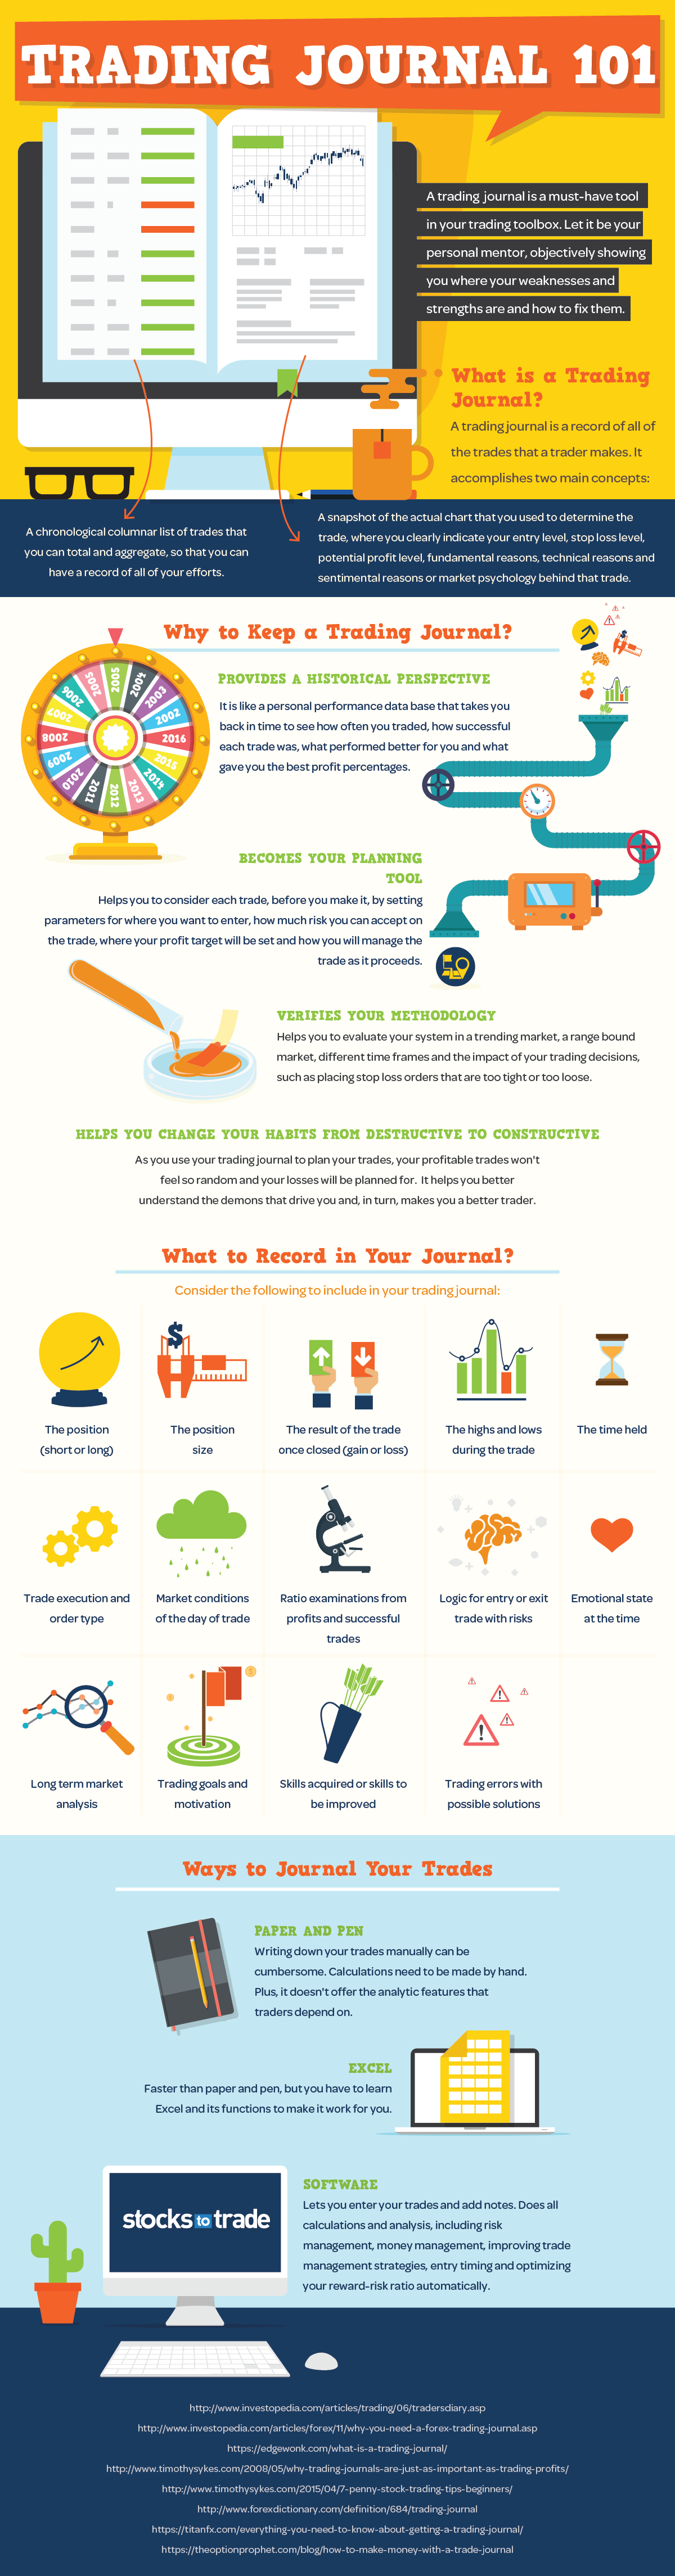 Trading Journal 101 {INFOGRAPHIC}